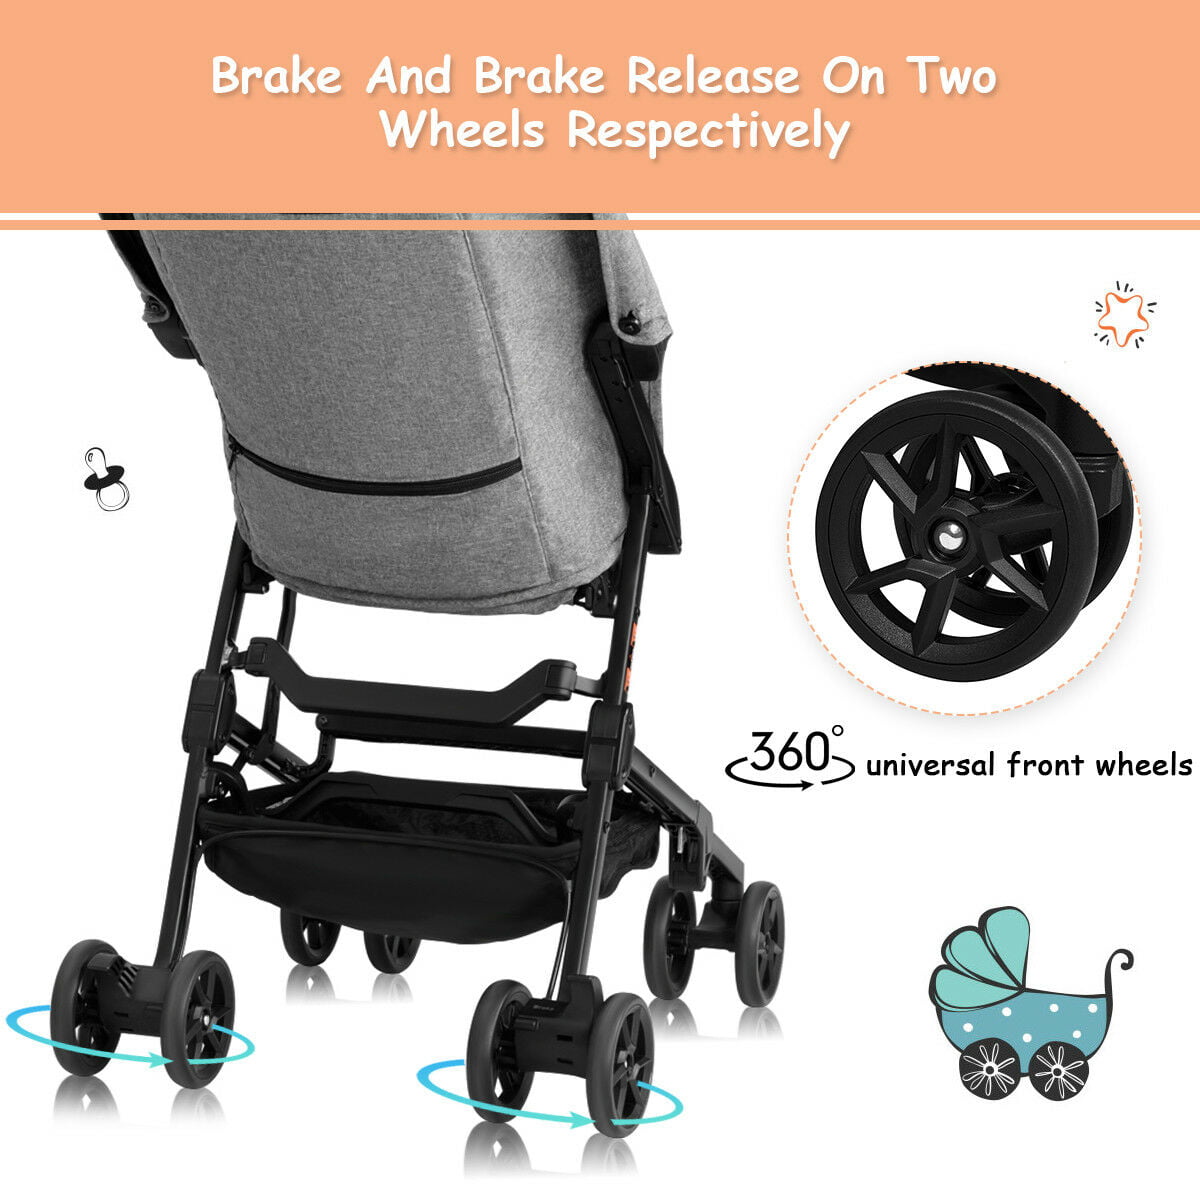 how much is a pocket stroller